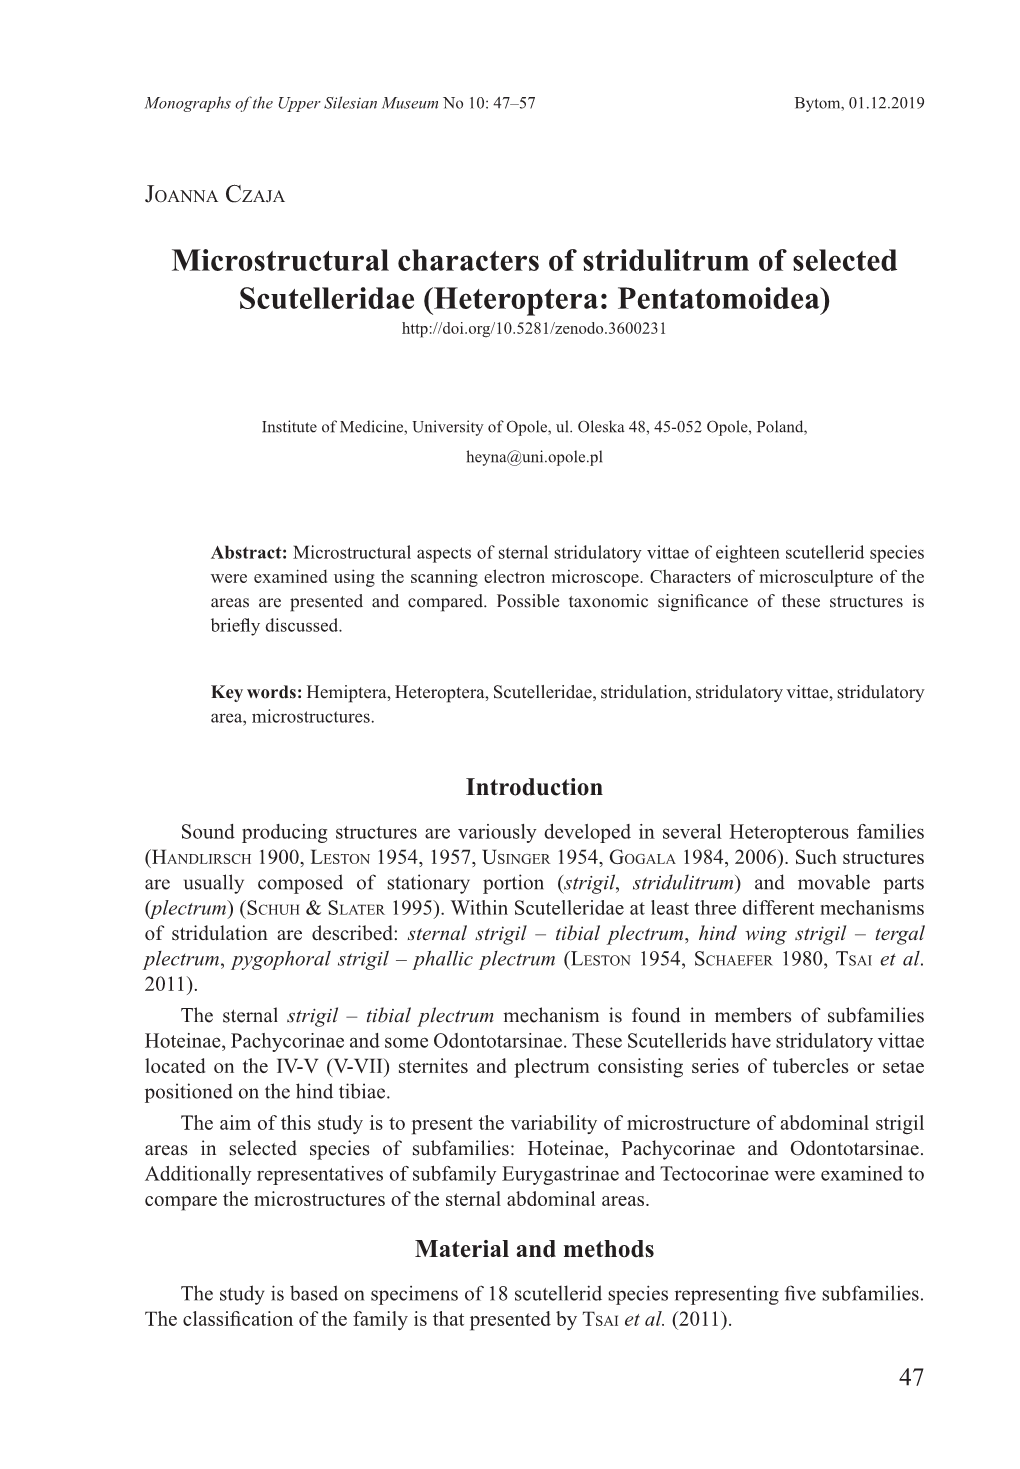 Monographs of the Upper Silesian Museum No 10: Microstructural